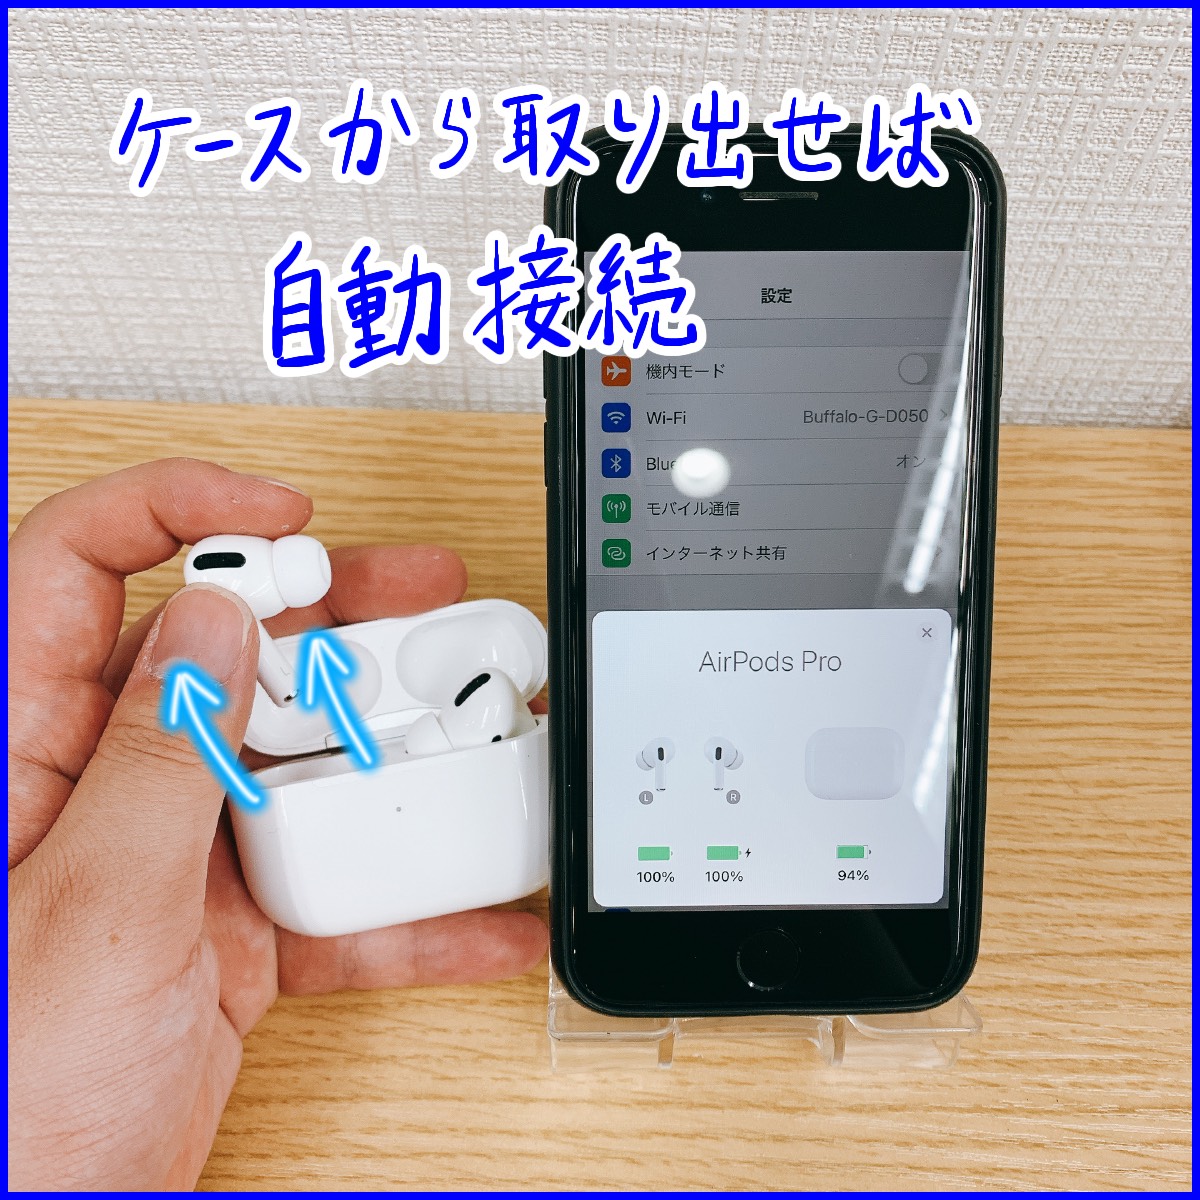 Air Pods Proのココが便利